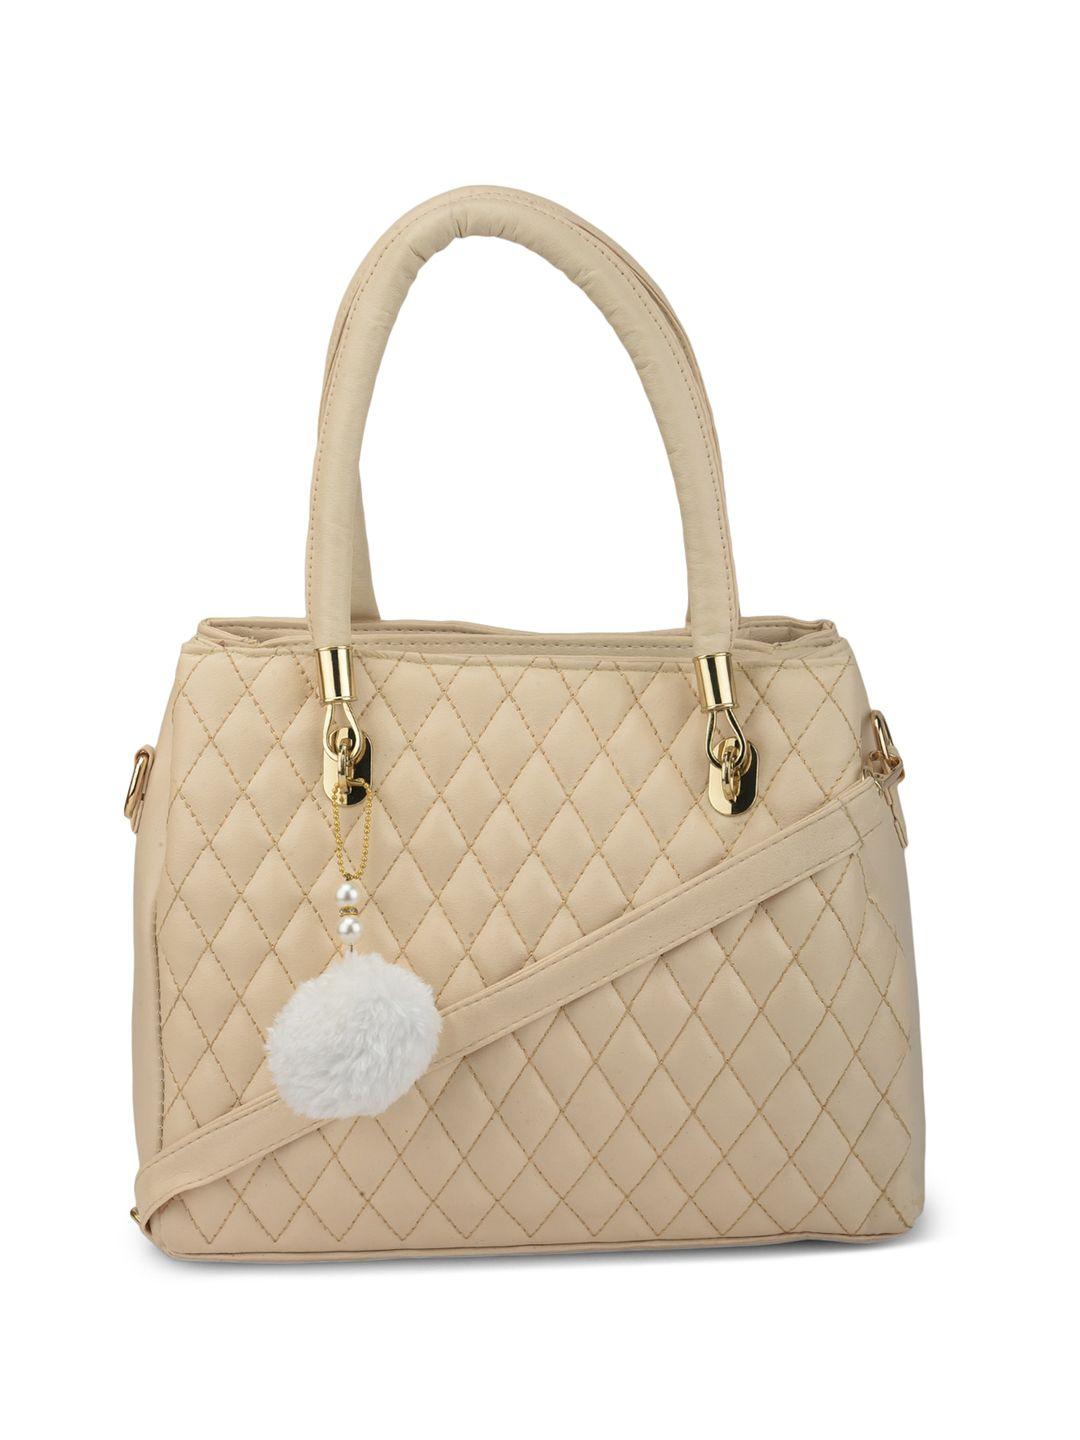 mehnam structured leather shoulder bag with quilted